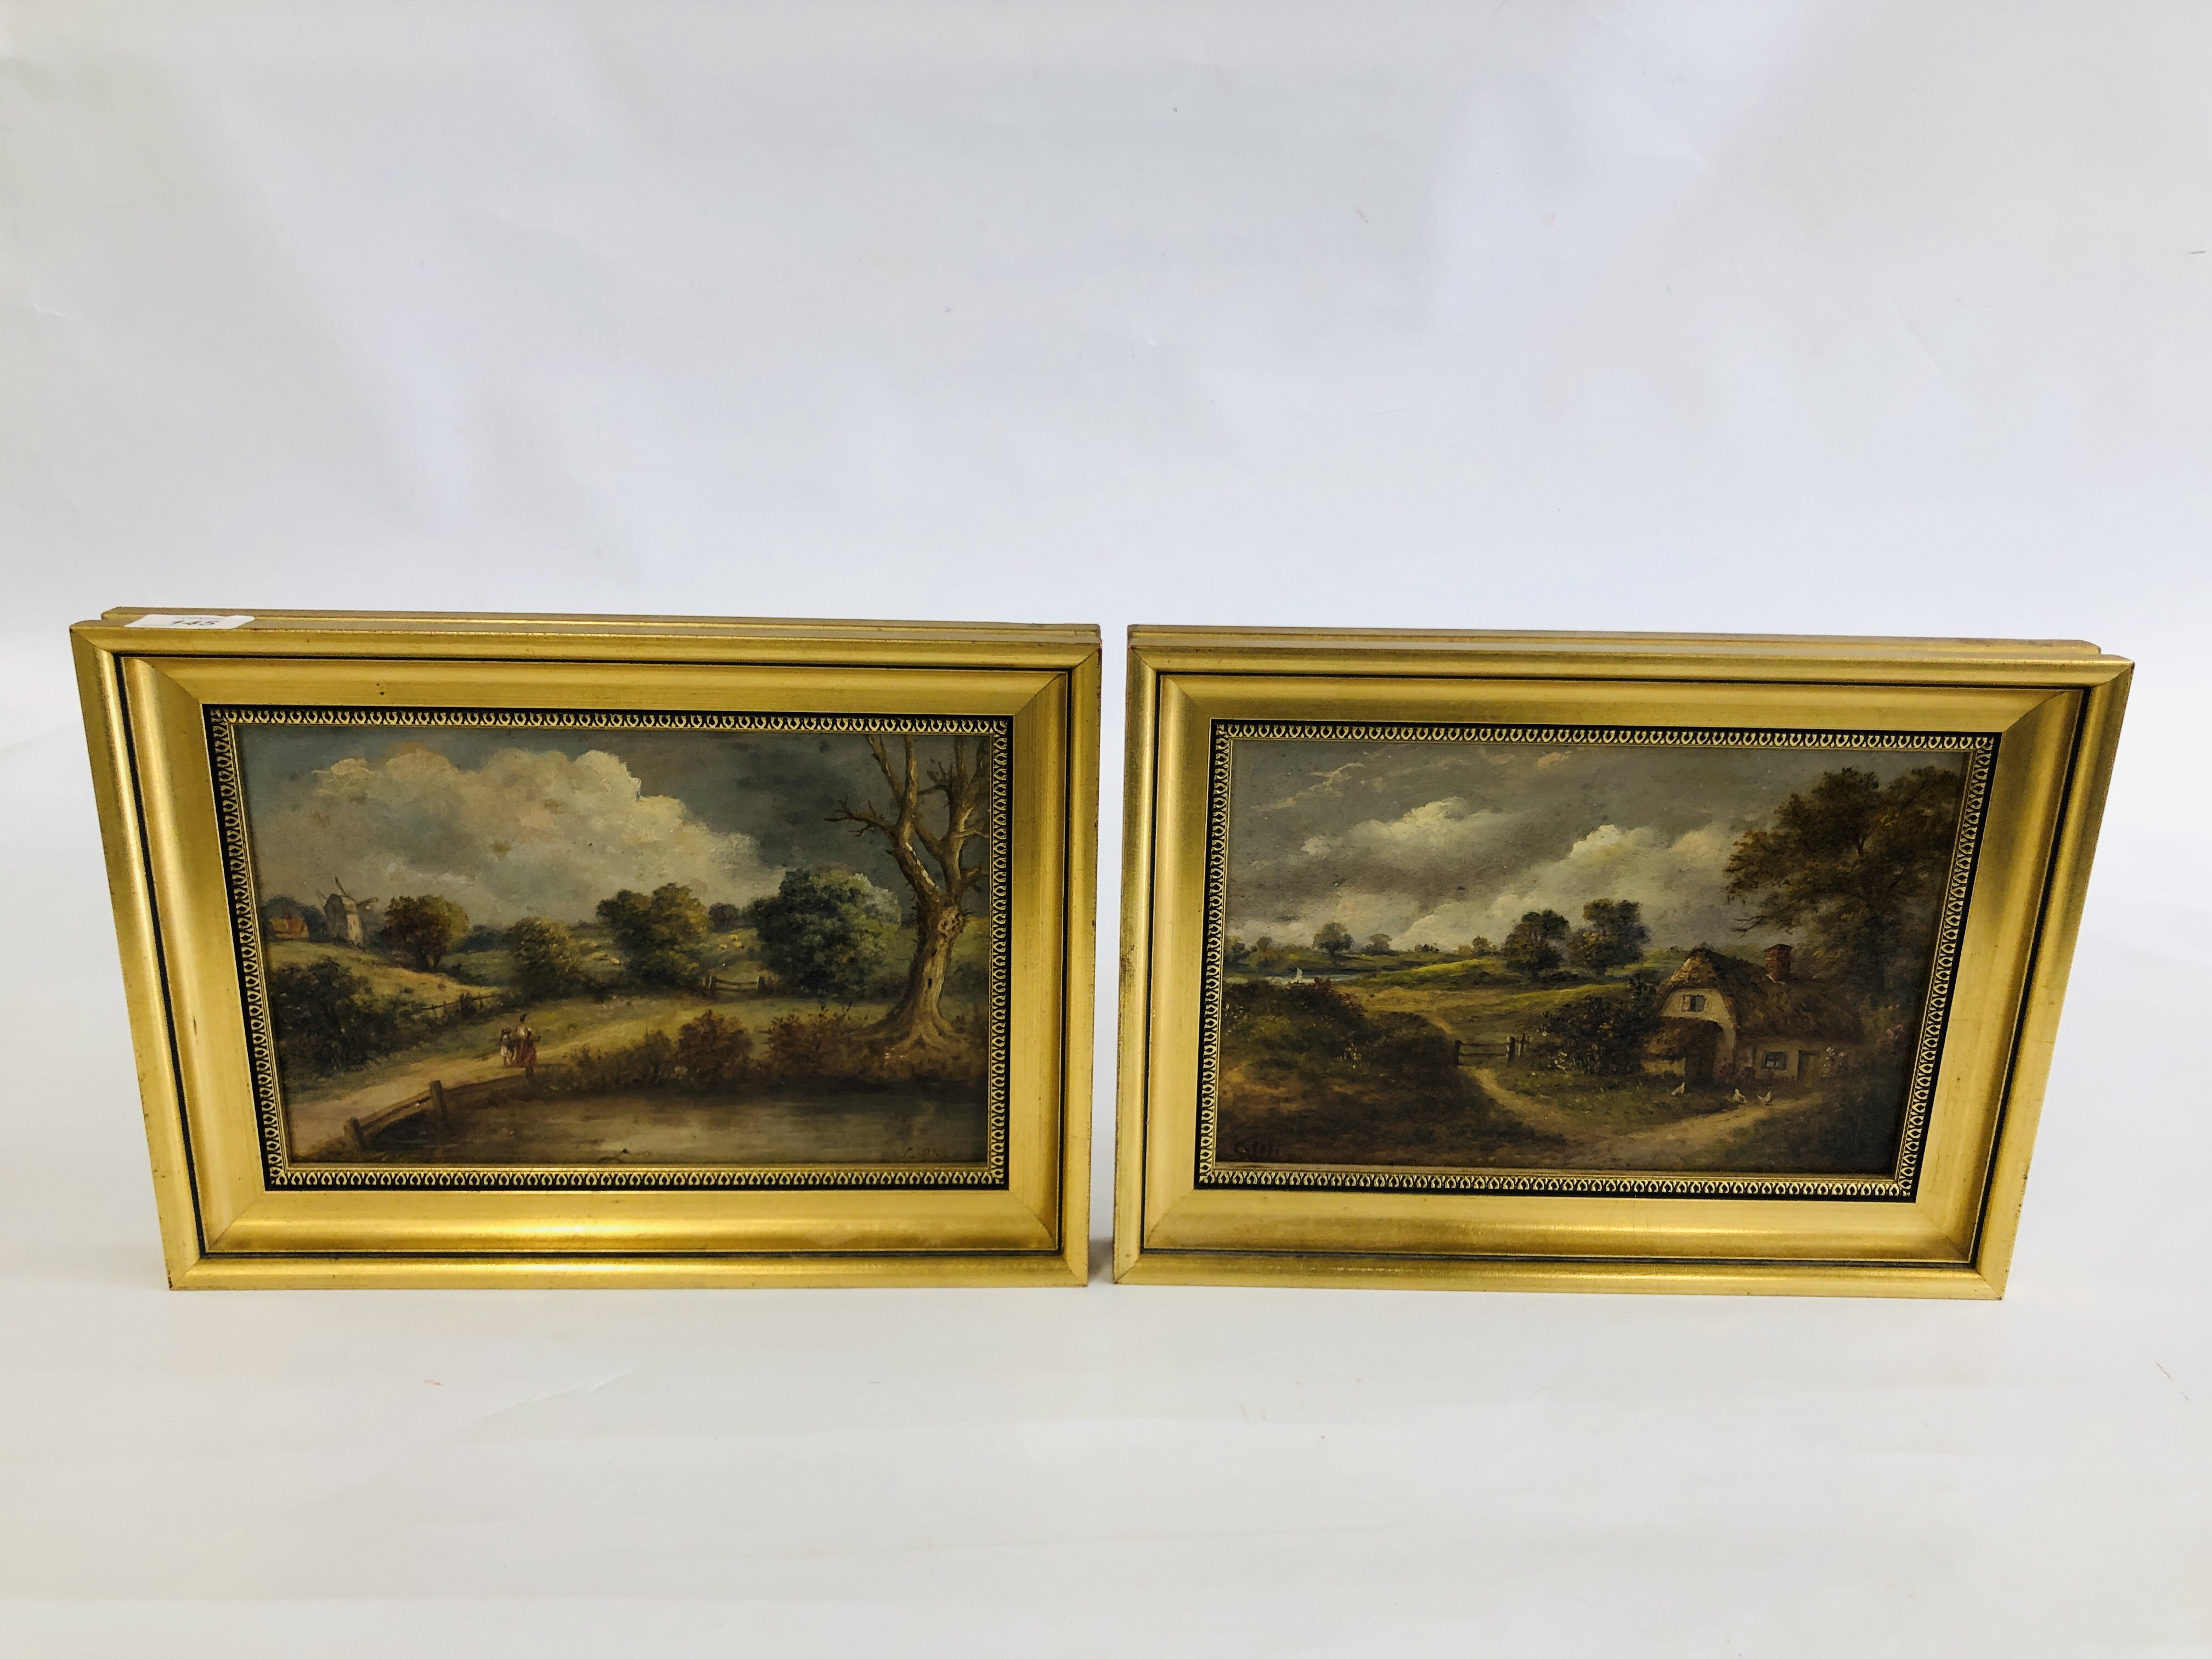 A PAIR OF OIL ON BOARD C. MASKELL PAINTINGS OF COUNTRY IPSWICH SCENES IN GILT FRAMES 18.5CM X 28.